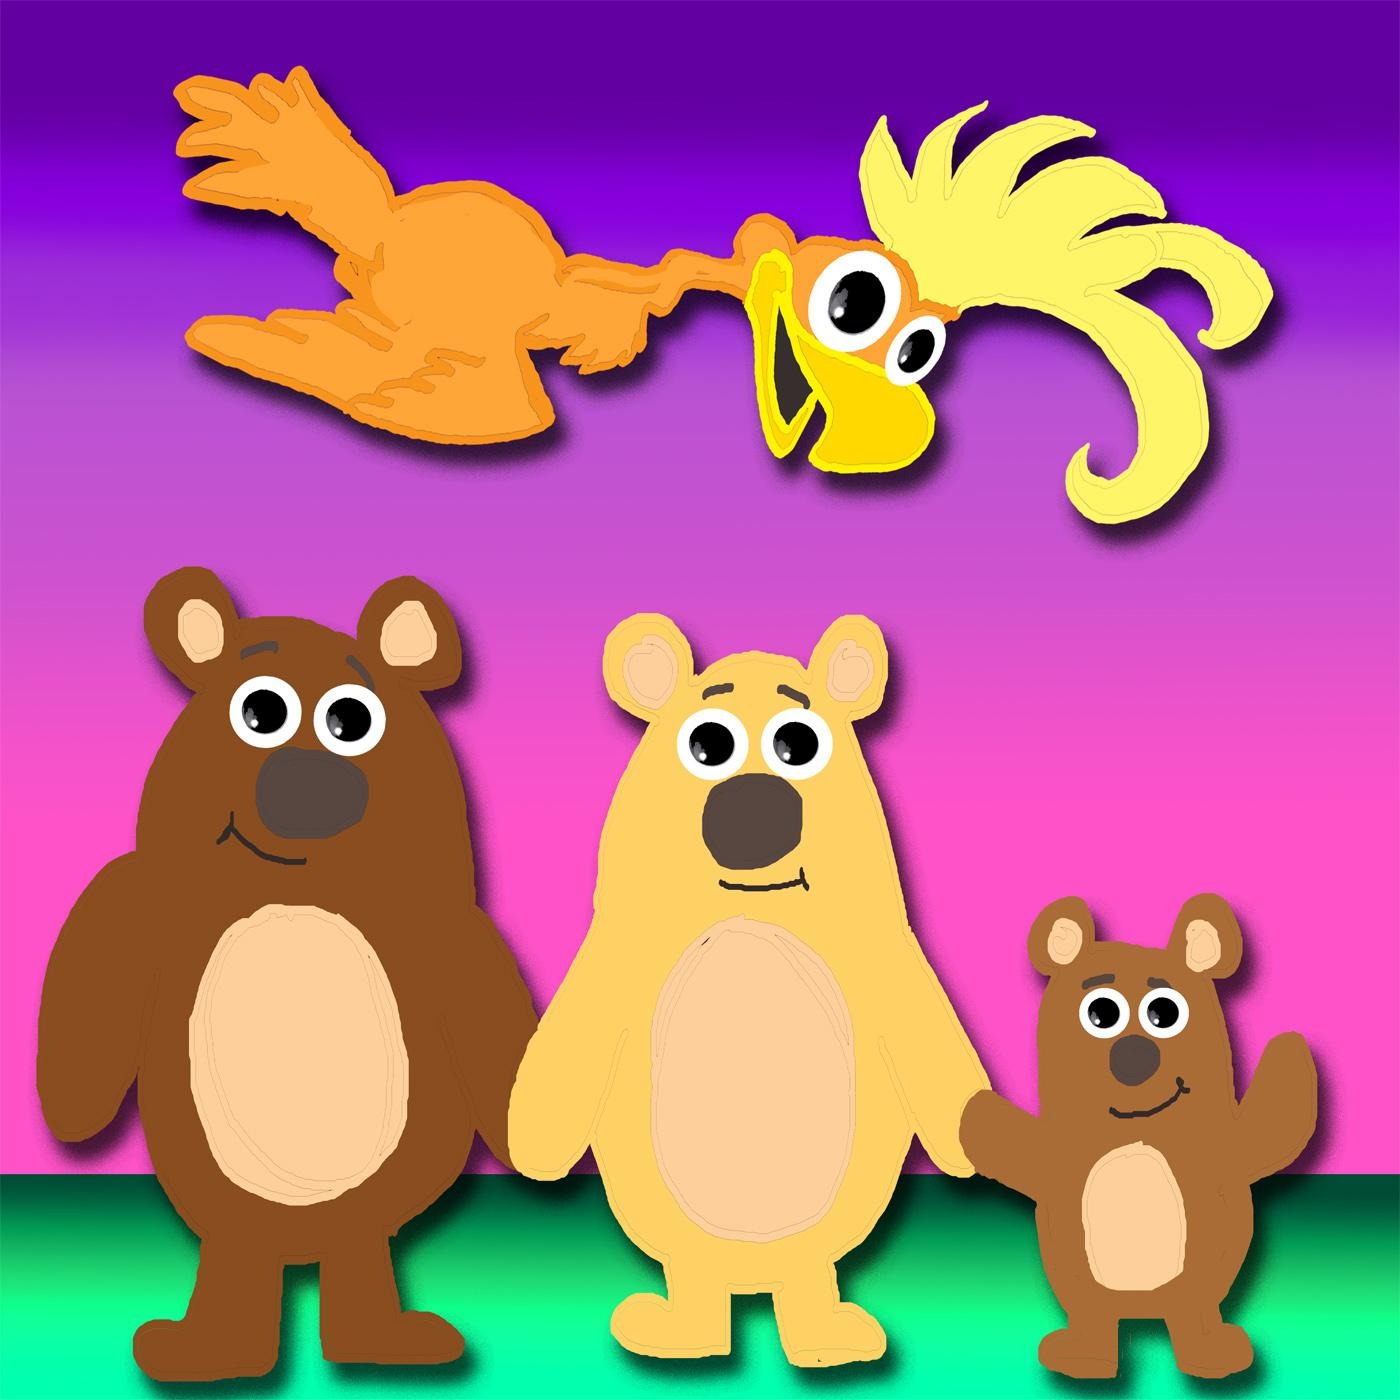 Goldisquawks and the Three Bears (Bedtime)